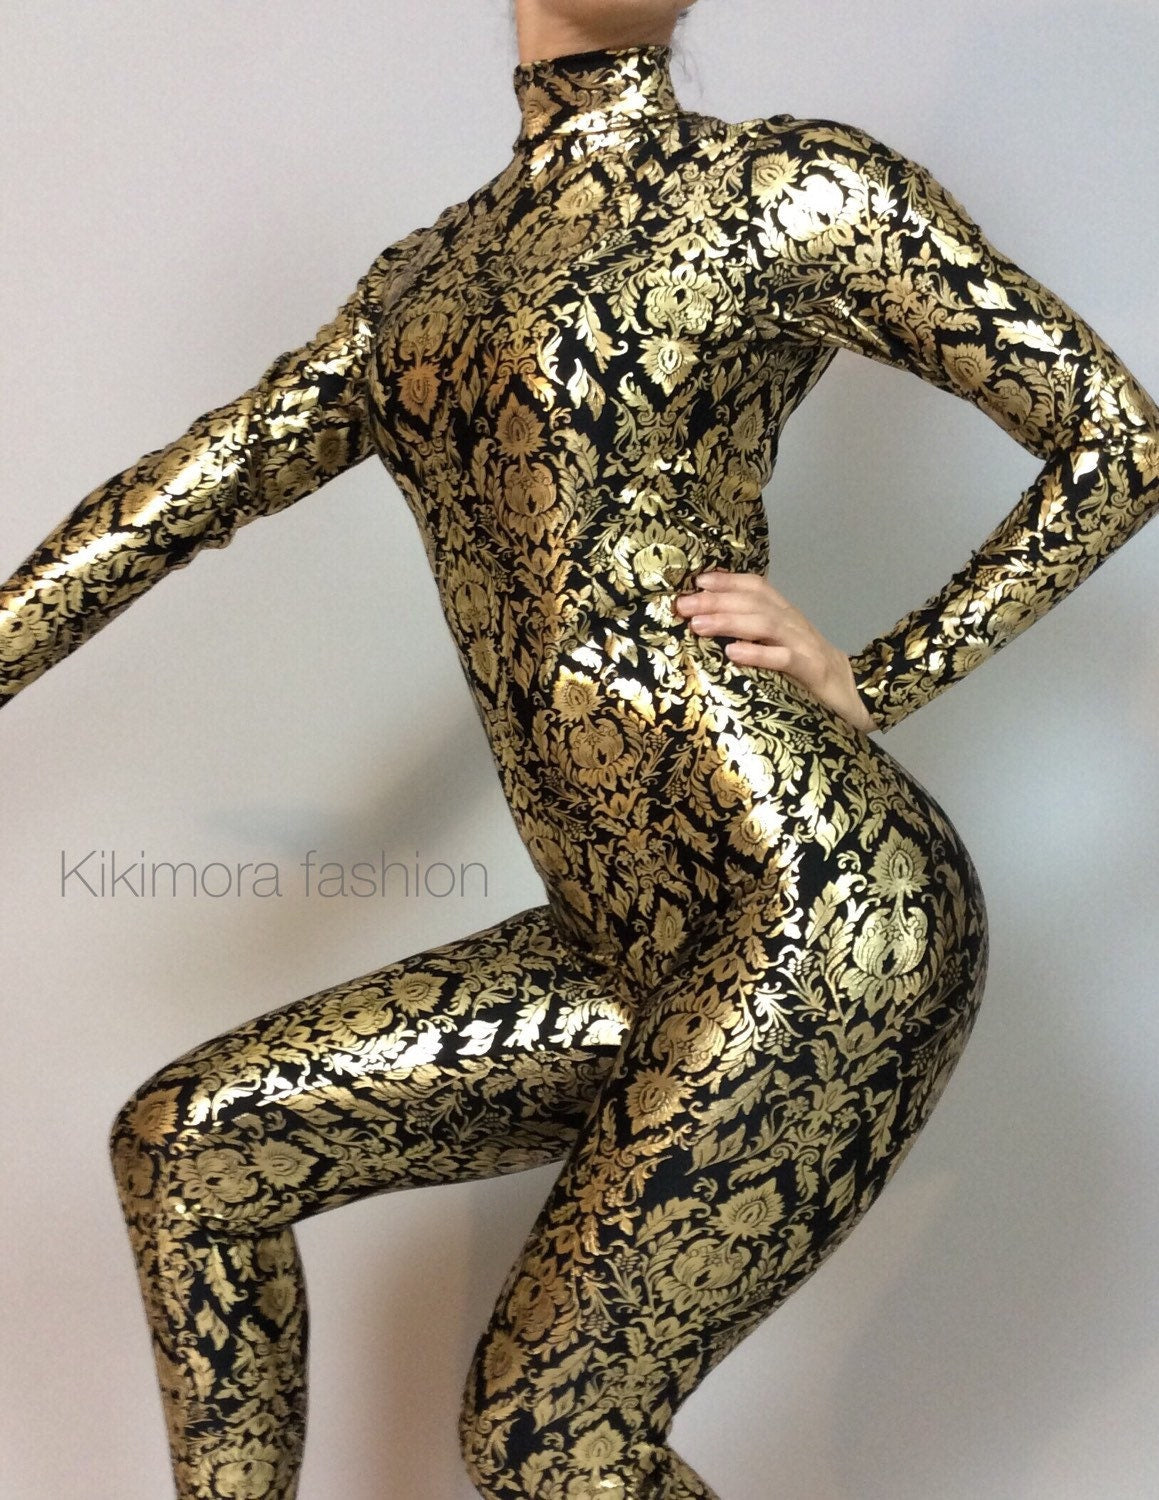 Catwoman, Bodysuit Costume, Exotic Dancewear, Beautiful Spandex Catsuit, Party Outfit